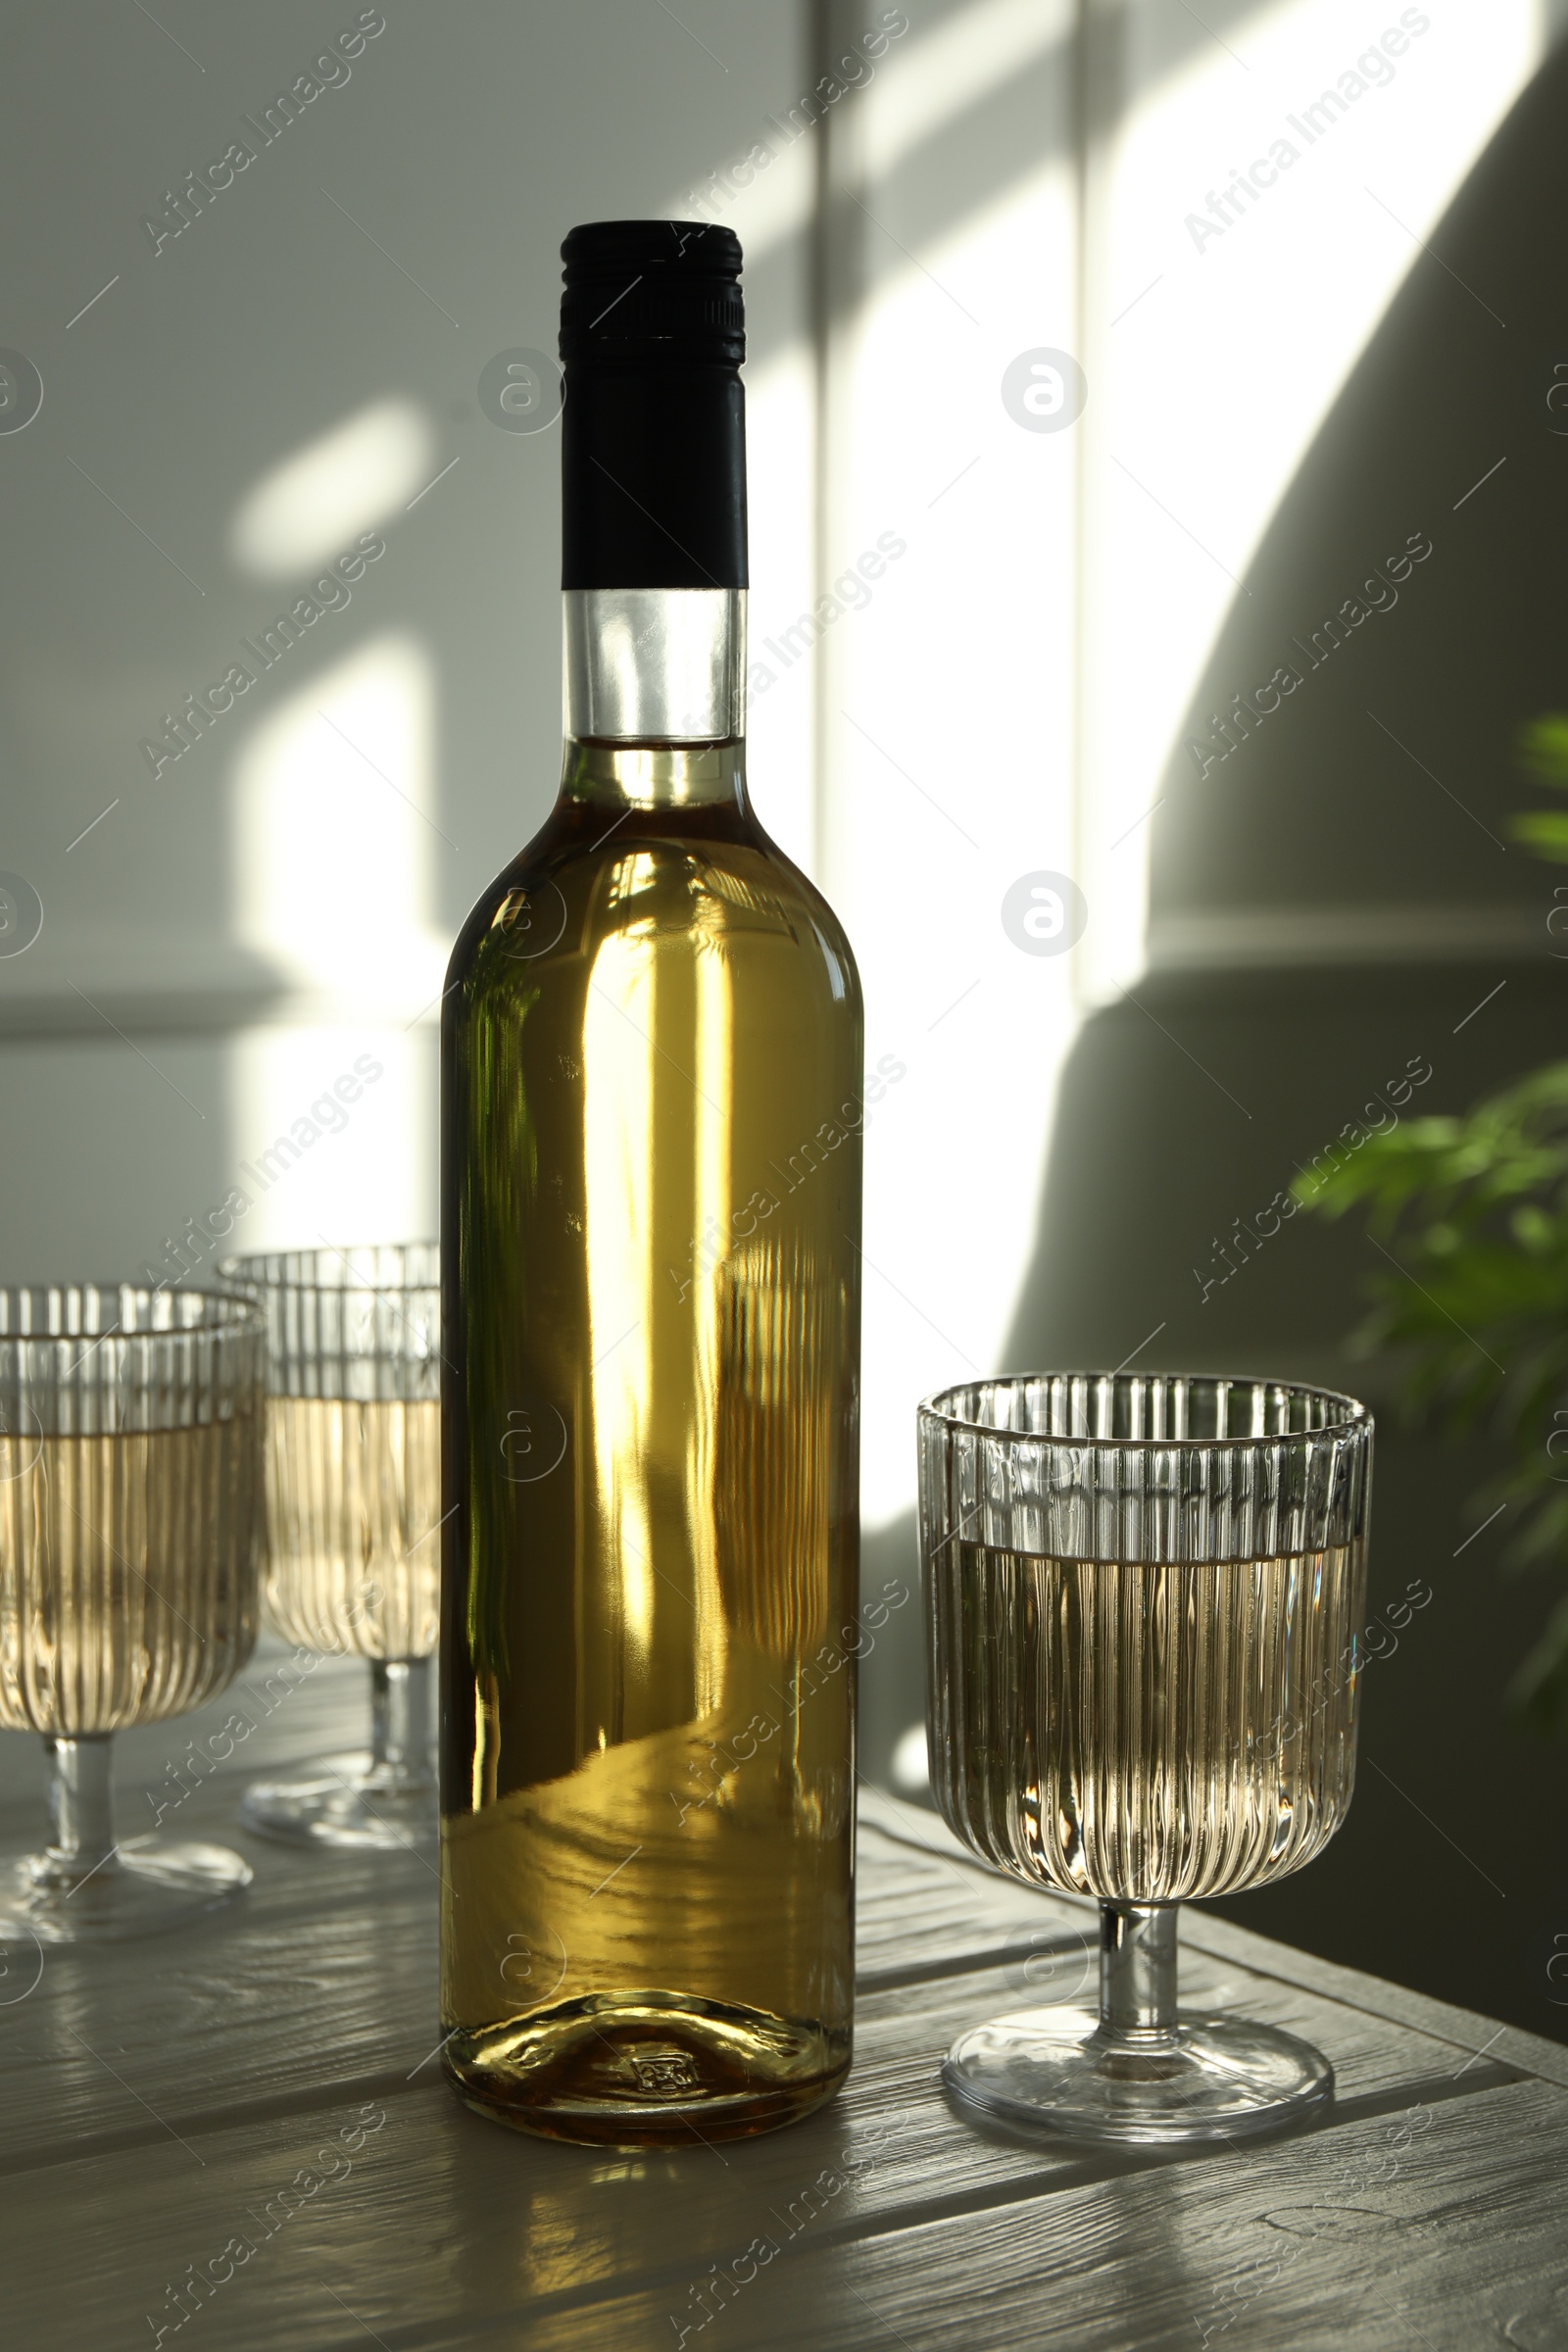 Photo of Alcohol drink in glasses and bottle on wooden table indoors